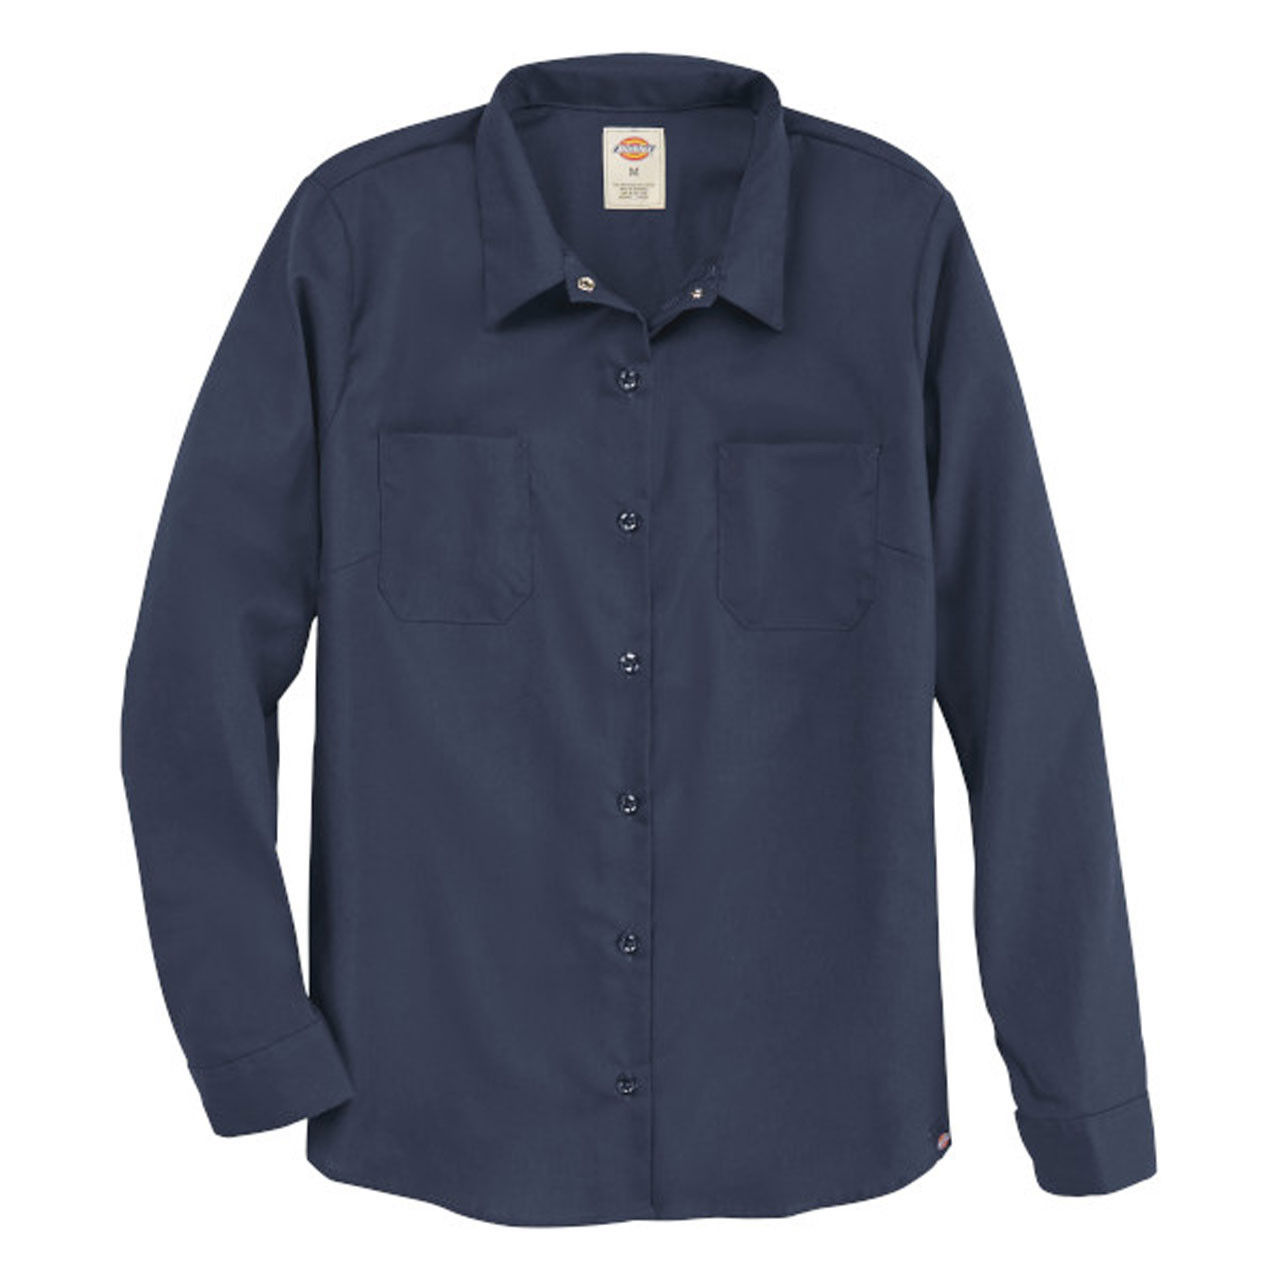 Does the dark blue work shirt ship from within the US?